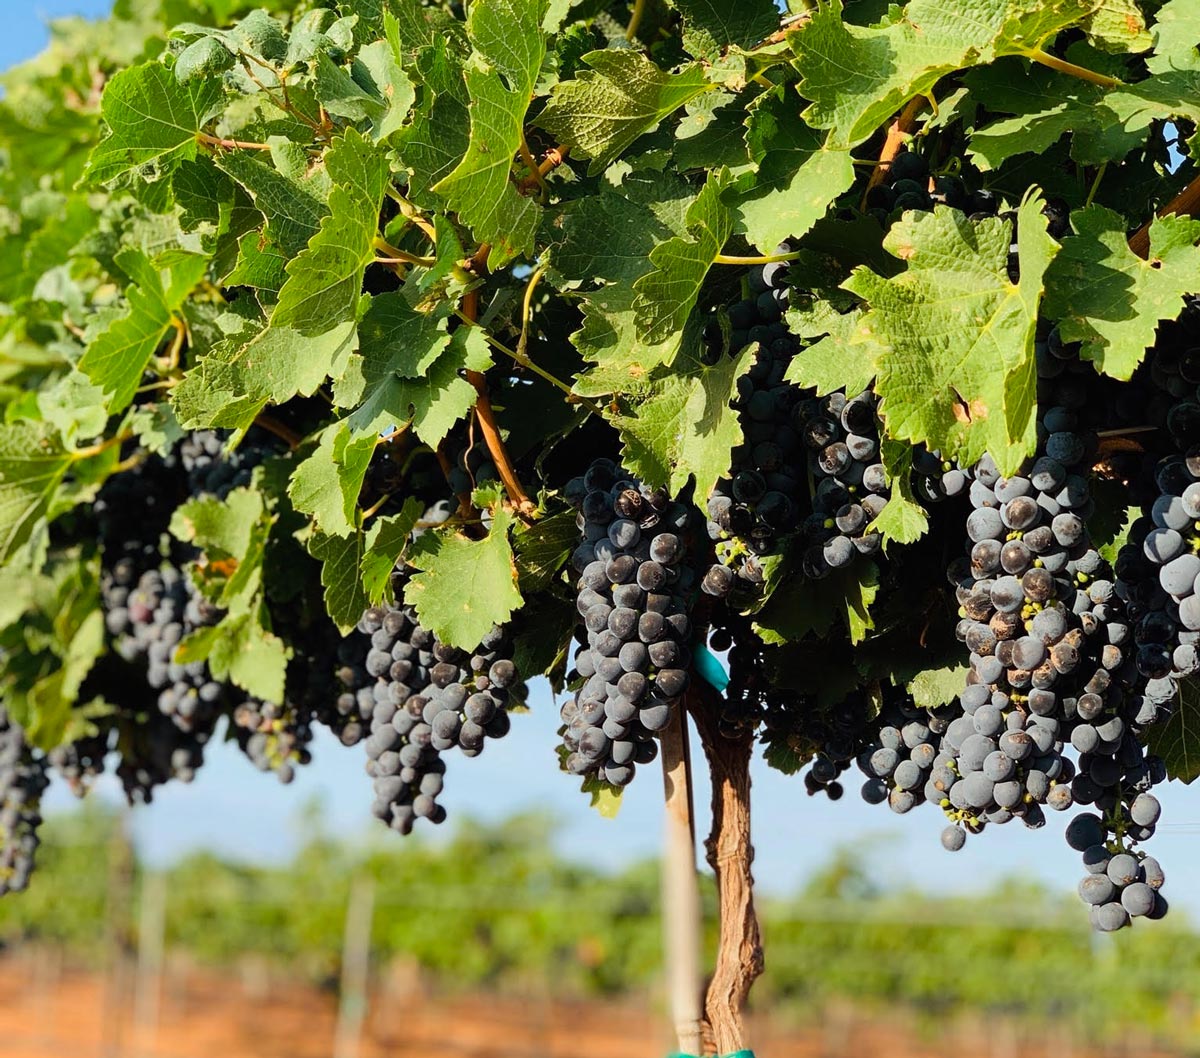 In California, a new strategy to fight grapevine-killing bacteria